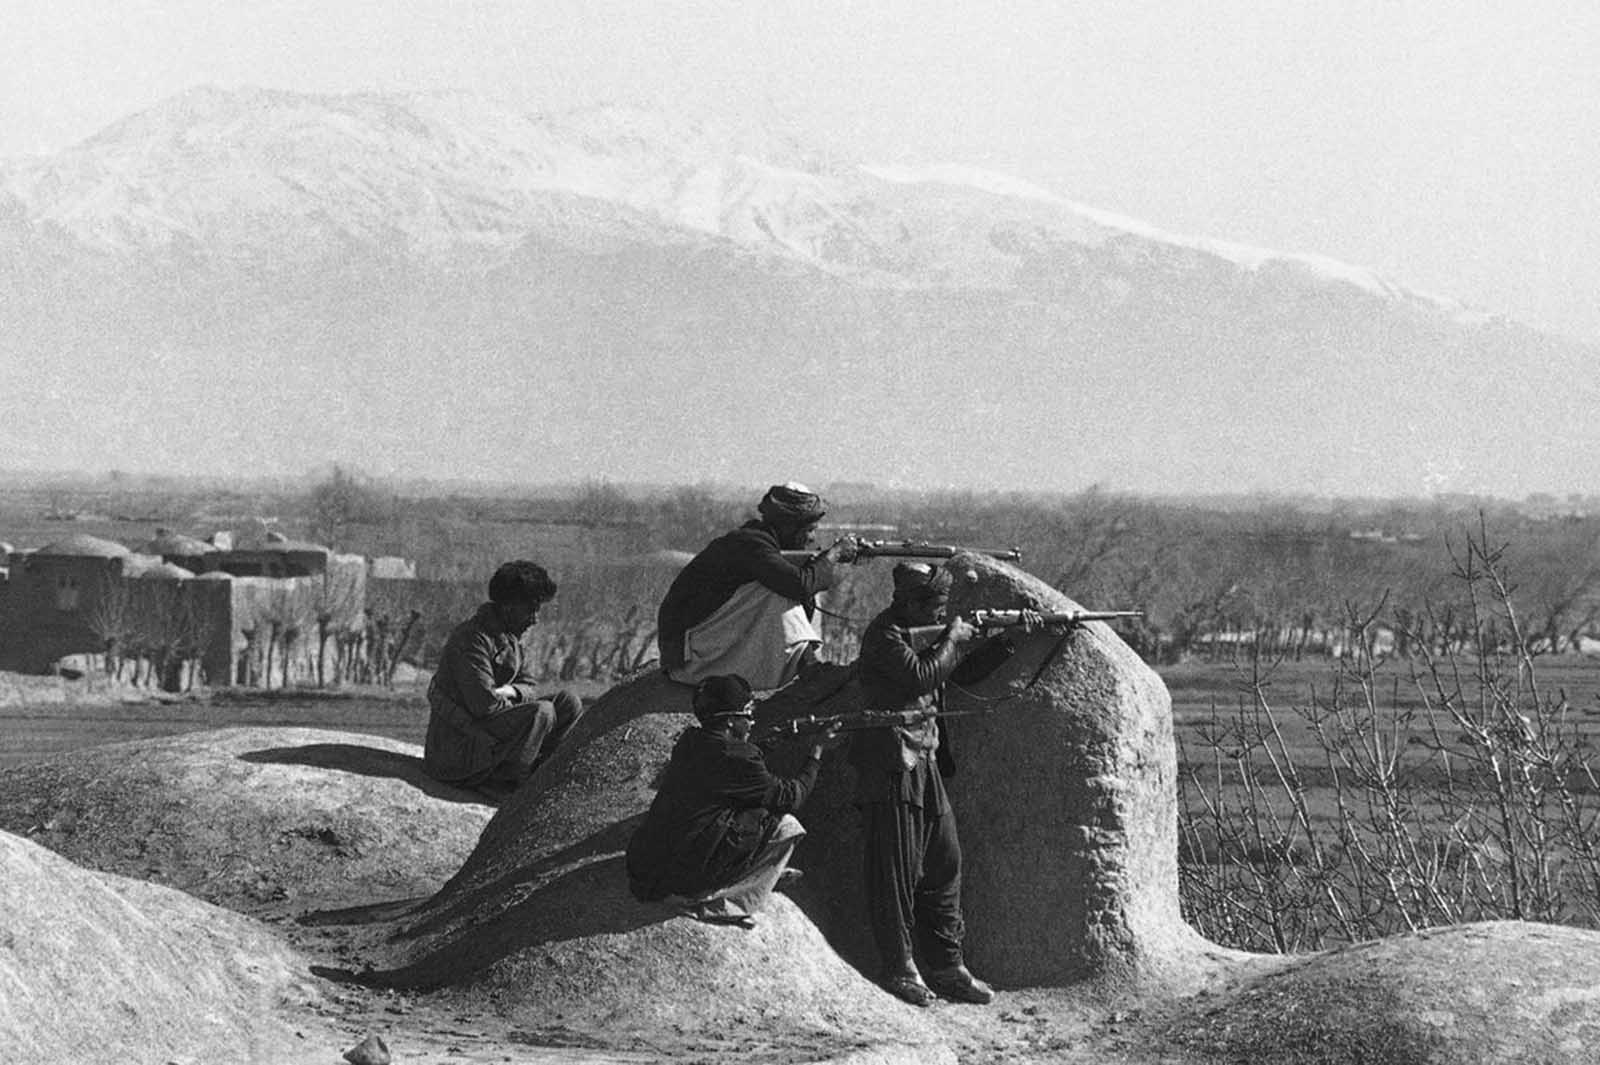 Mujahedeen positioned on rooftops about 10 kilometers from Herat, keeping watch for Russian convoys, on February 15, 1980.